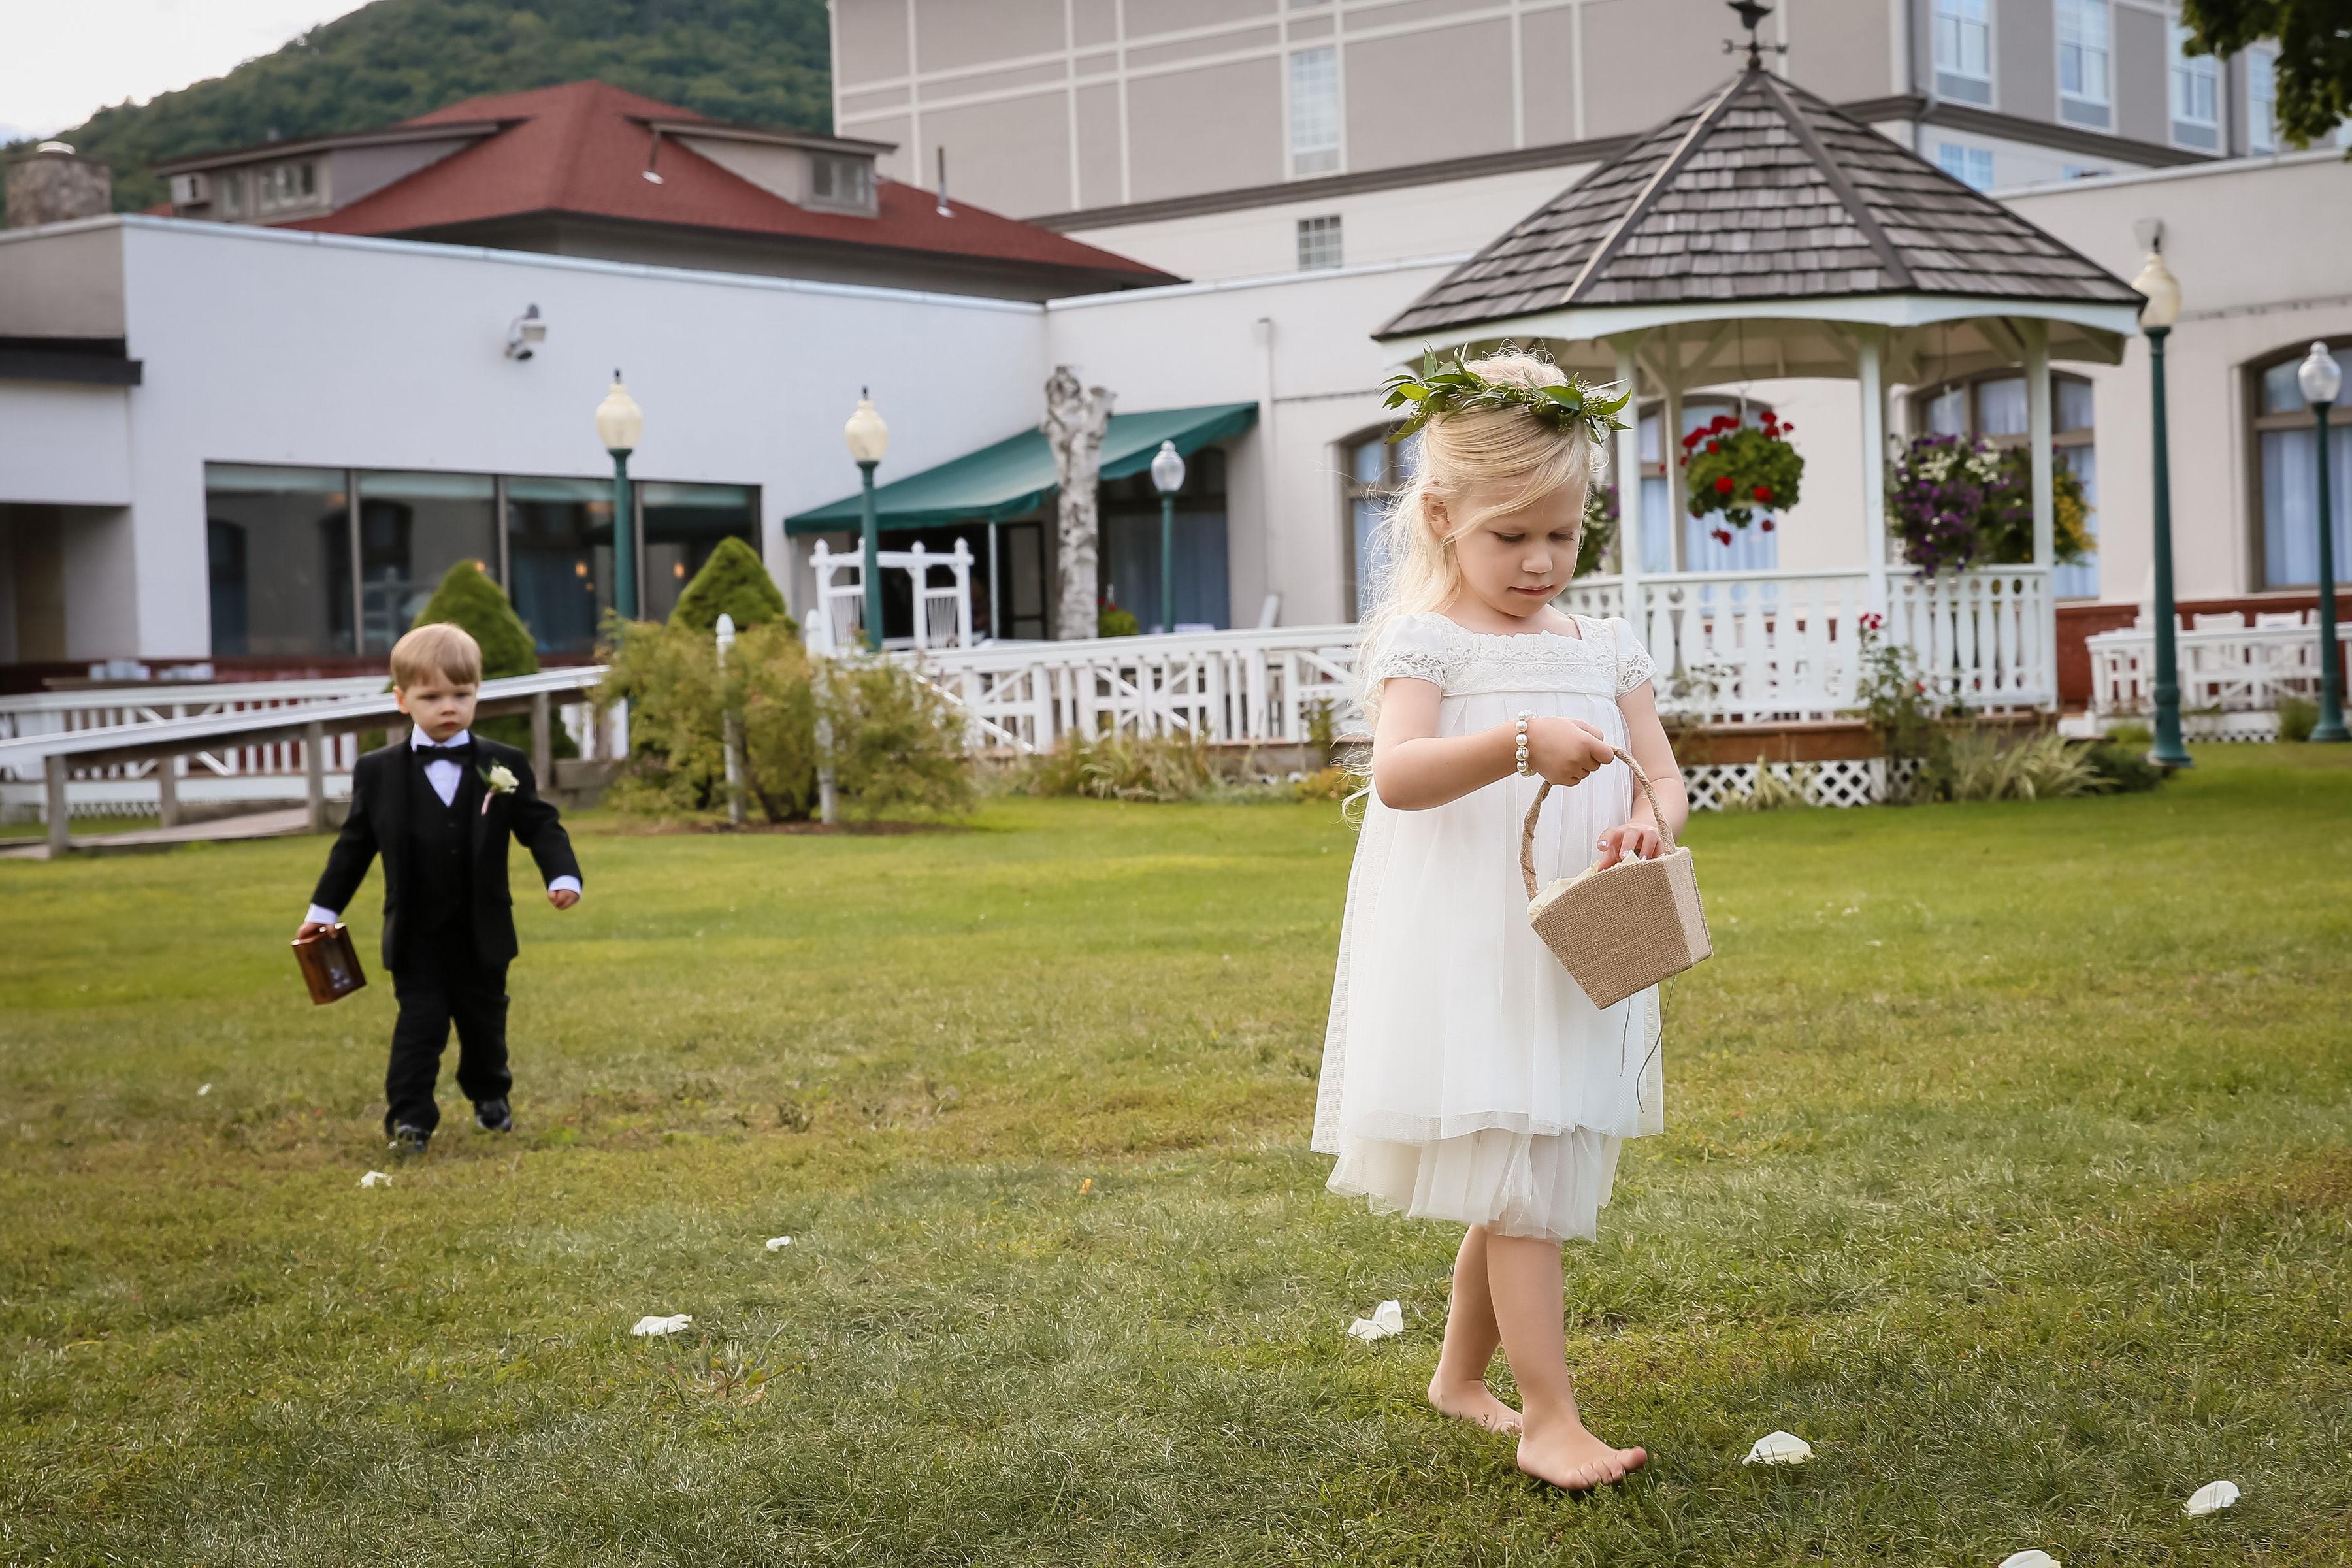 Toddler flower girl walks across the lawn with toddler ring bearer following